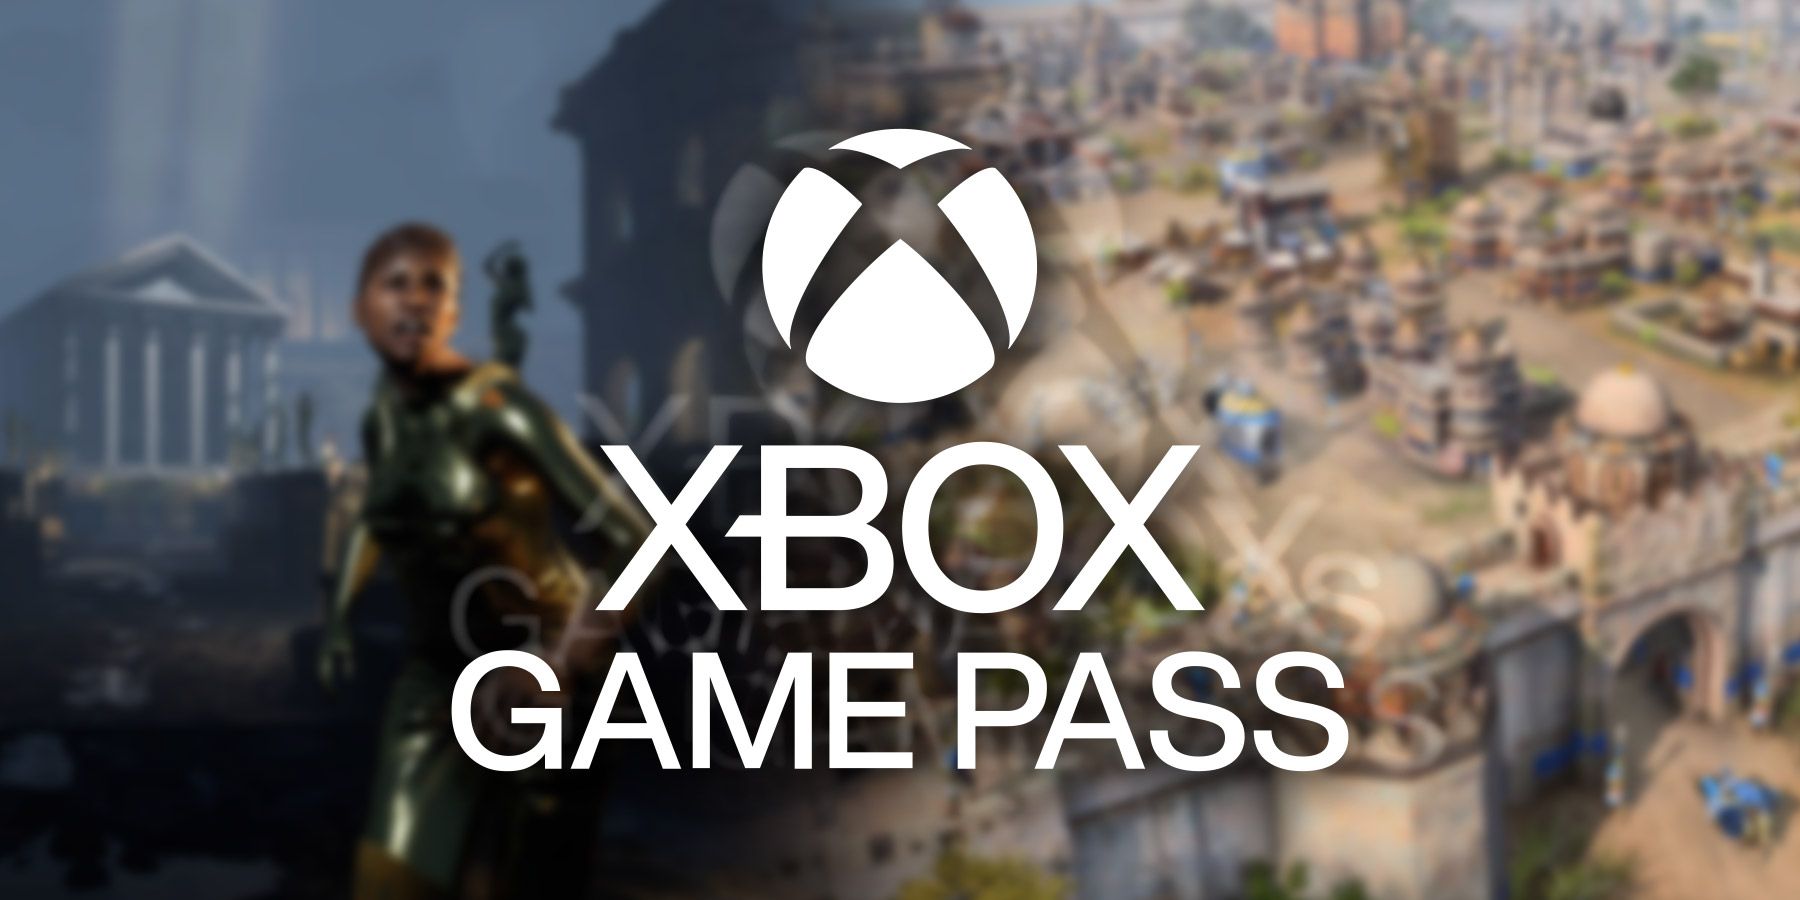 October 28 is Going to Be A Big Day for Xbox Game Pass Subscribers